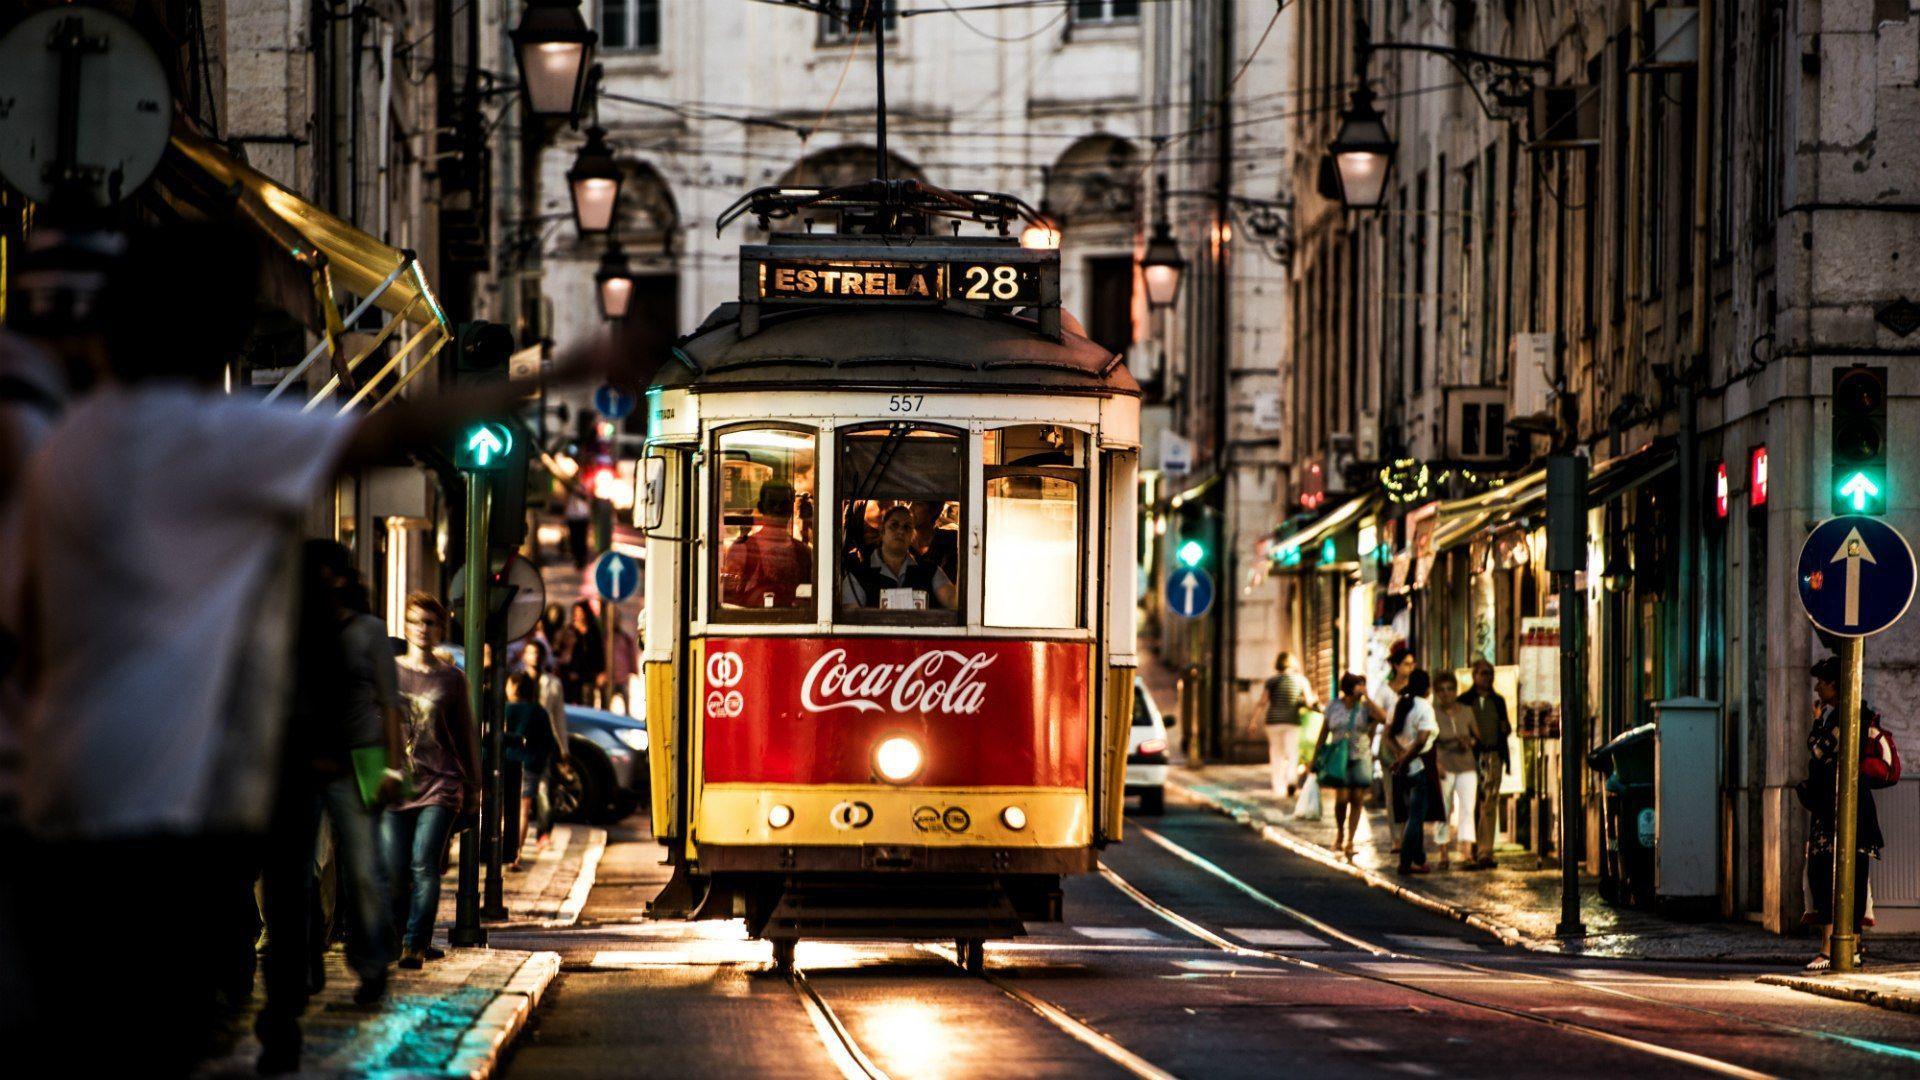 Tram in Lisbon, Portugal wallpapers and Wallpaper